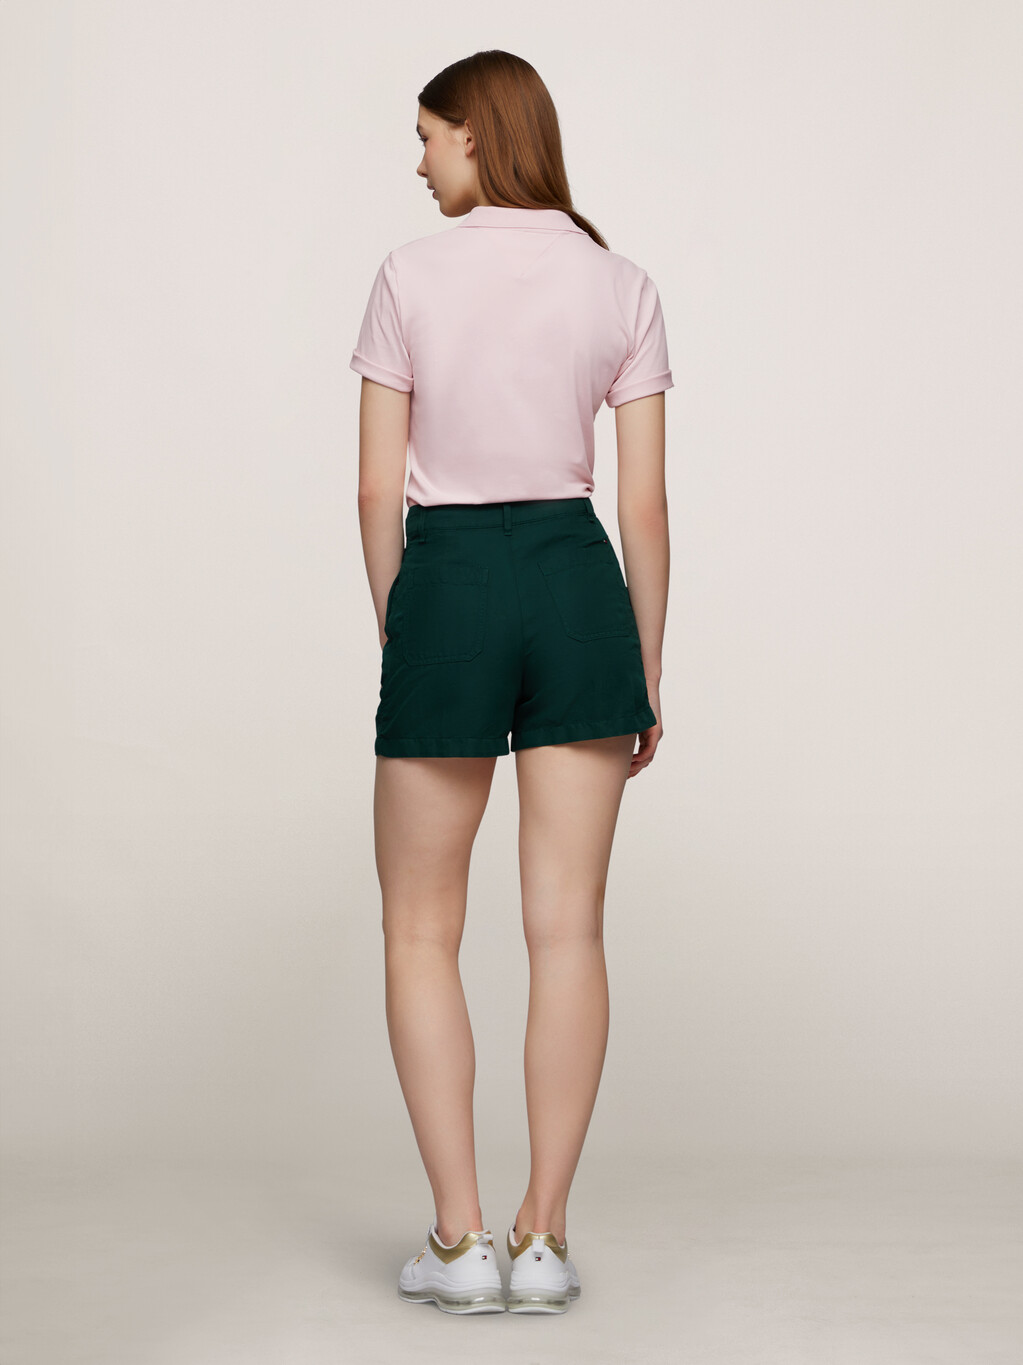 1985 Collection Regular Fit Polo, Whimsy Pink, hi-res